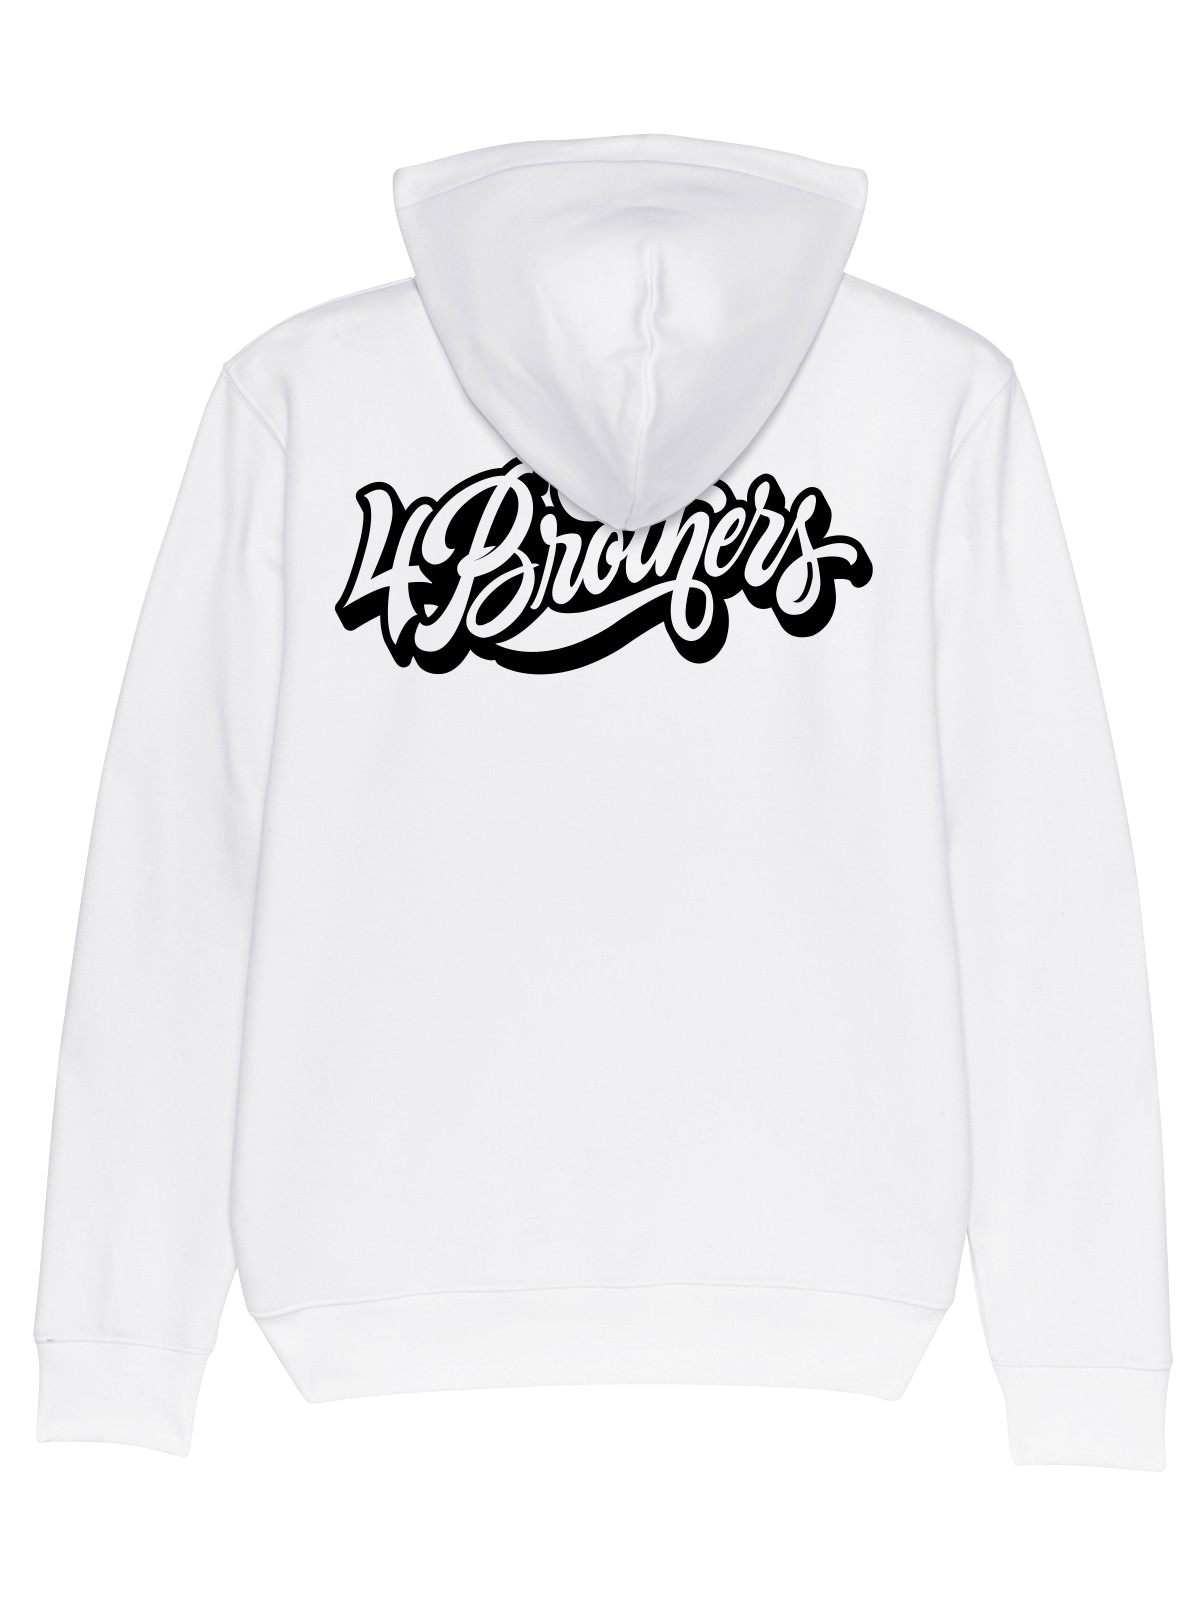 4Brothers Hoodie comic font  Hoody New White 4XL